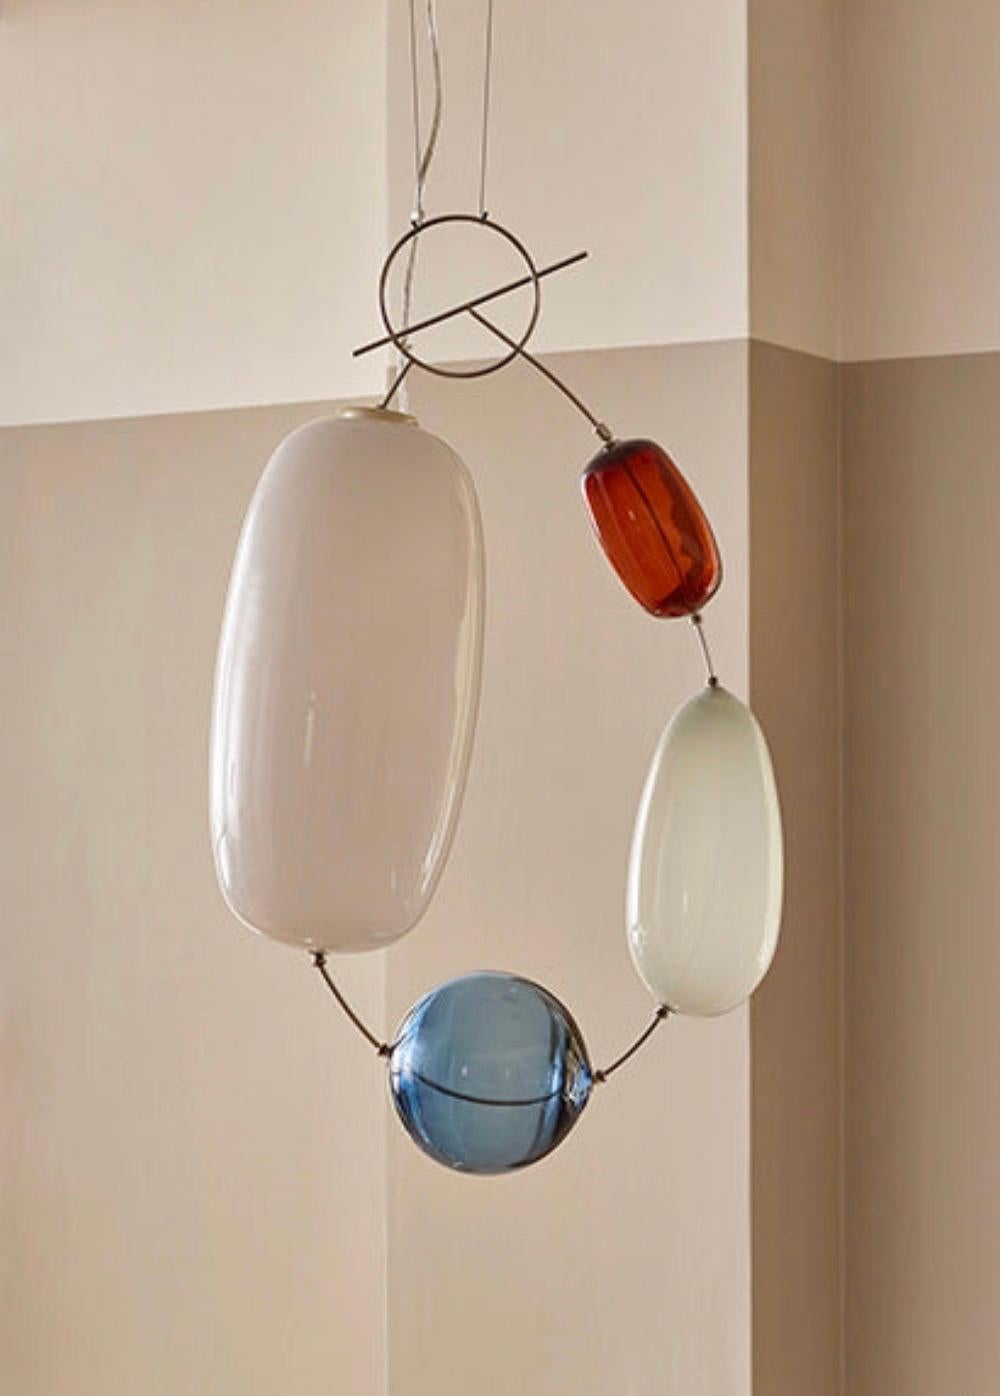 Exceptional pendant made out of mouth blown glass and stainless steel. 
A quality contemporary design by Finnish designer Katriina Nuutinen. 
The design was originally designed in 2009 and made in a sold out limited edition of only 200 pieces